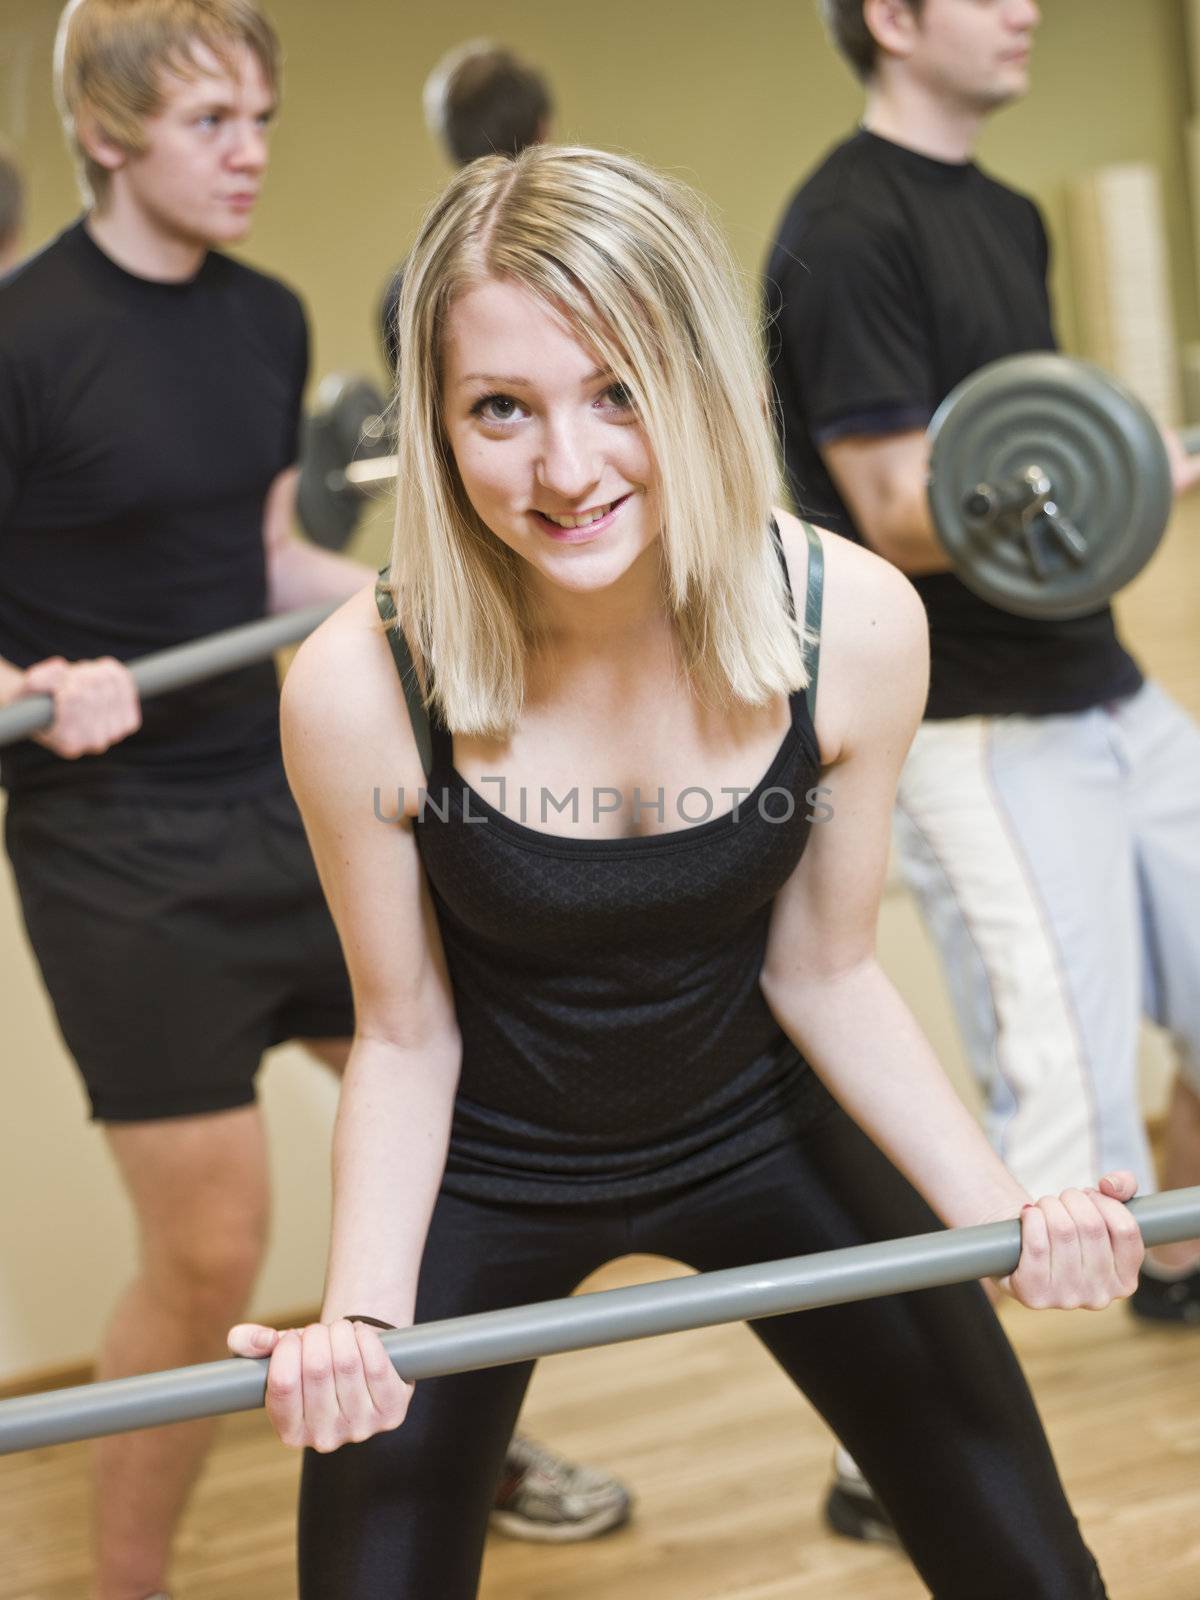 Girl lifting weights at the gym